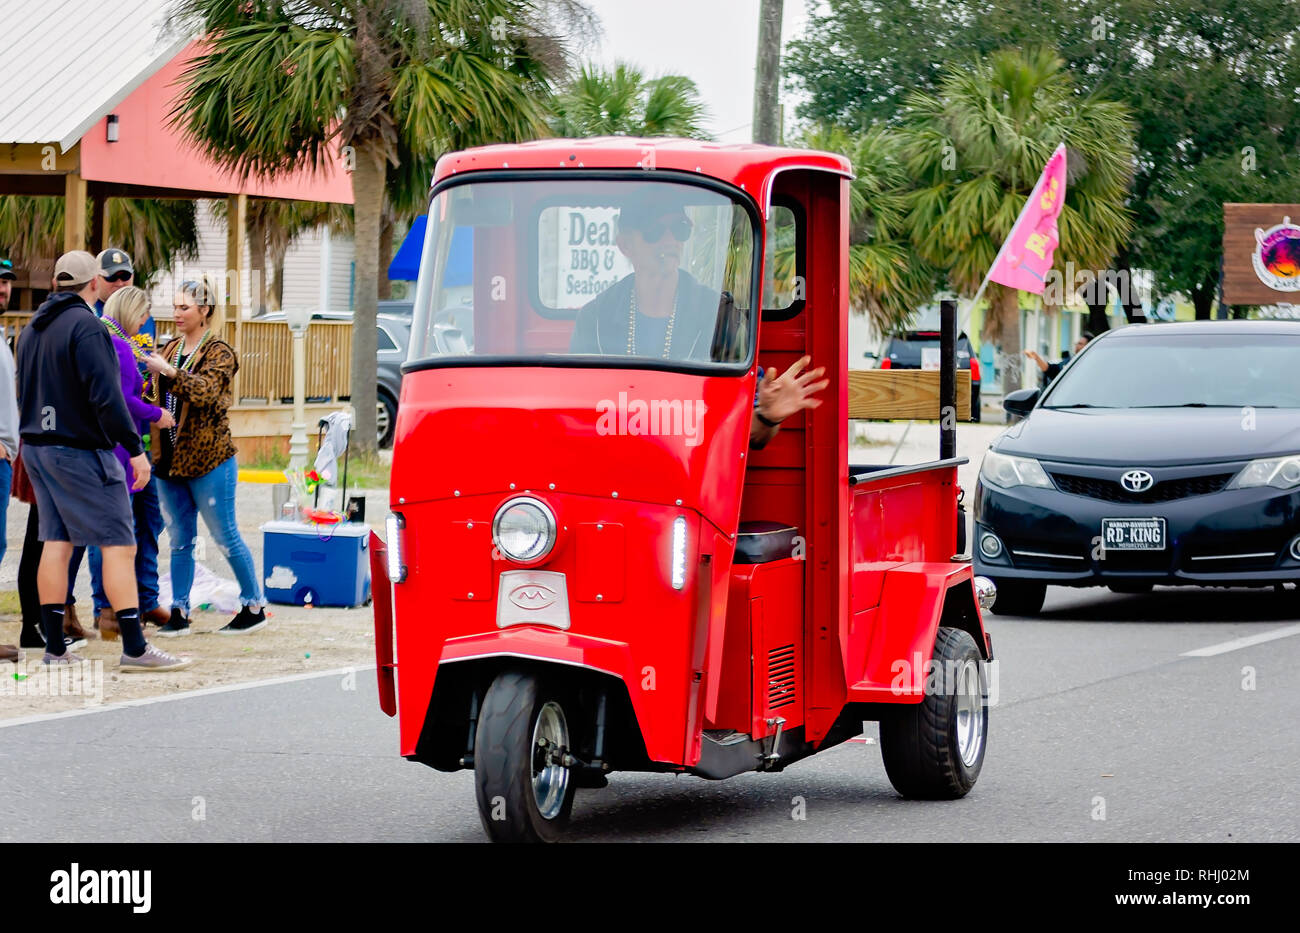 Dauphin Island, Alabama, USA. 2nd Feb, 2019. A man drives a vintage Cushman Truckster in the Krewe de la Dauphine Mardi Gras parade, Feb. 2, 2019, in Dauphin Island, Alabama. The Dauphin Island parade kicks off the official Mardi Gras parade season in Mobile, Alabama. Mobile’s first official Mardi Gras celebration was recorded in 1703.  (Photo by Carmen K. Sisson/Cloudybright) Credit: Carmen K. Sisson/Cloudybright/Alamy Live News Stock Photo